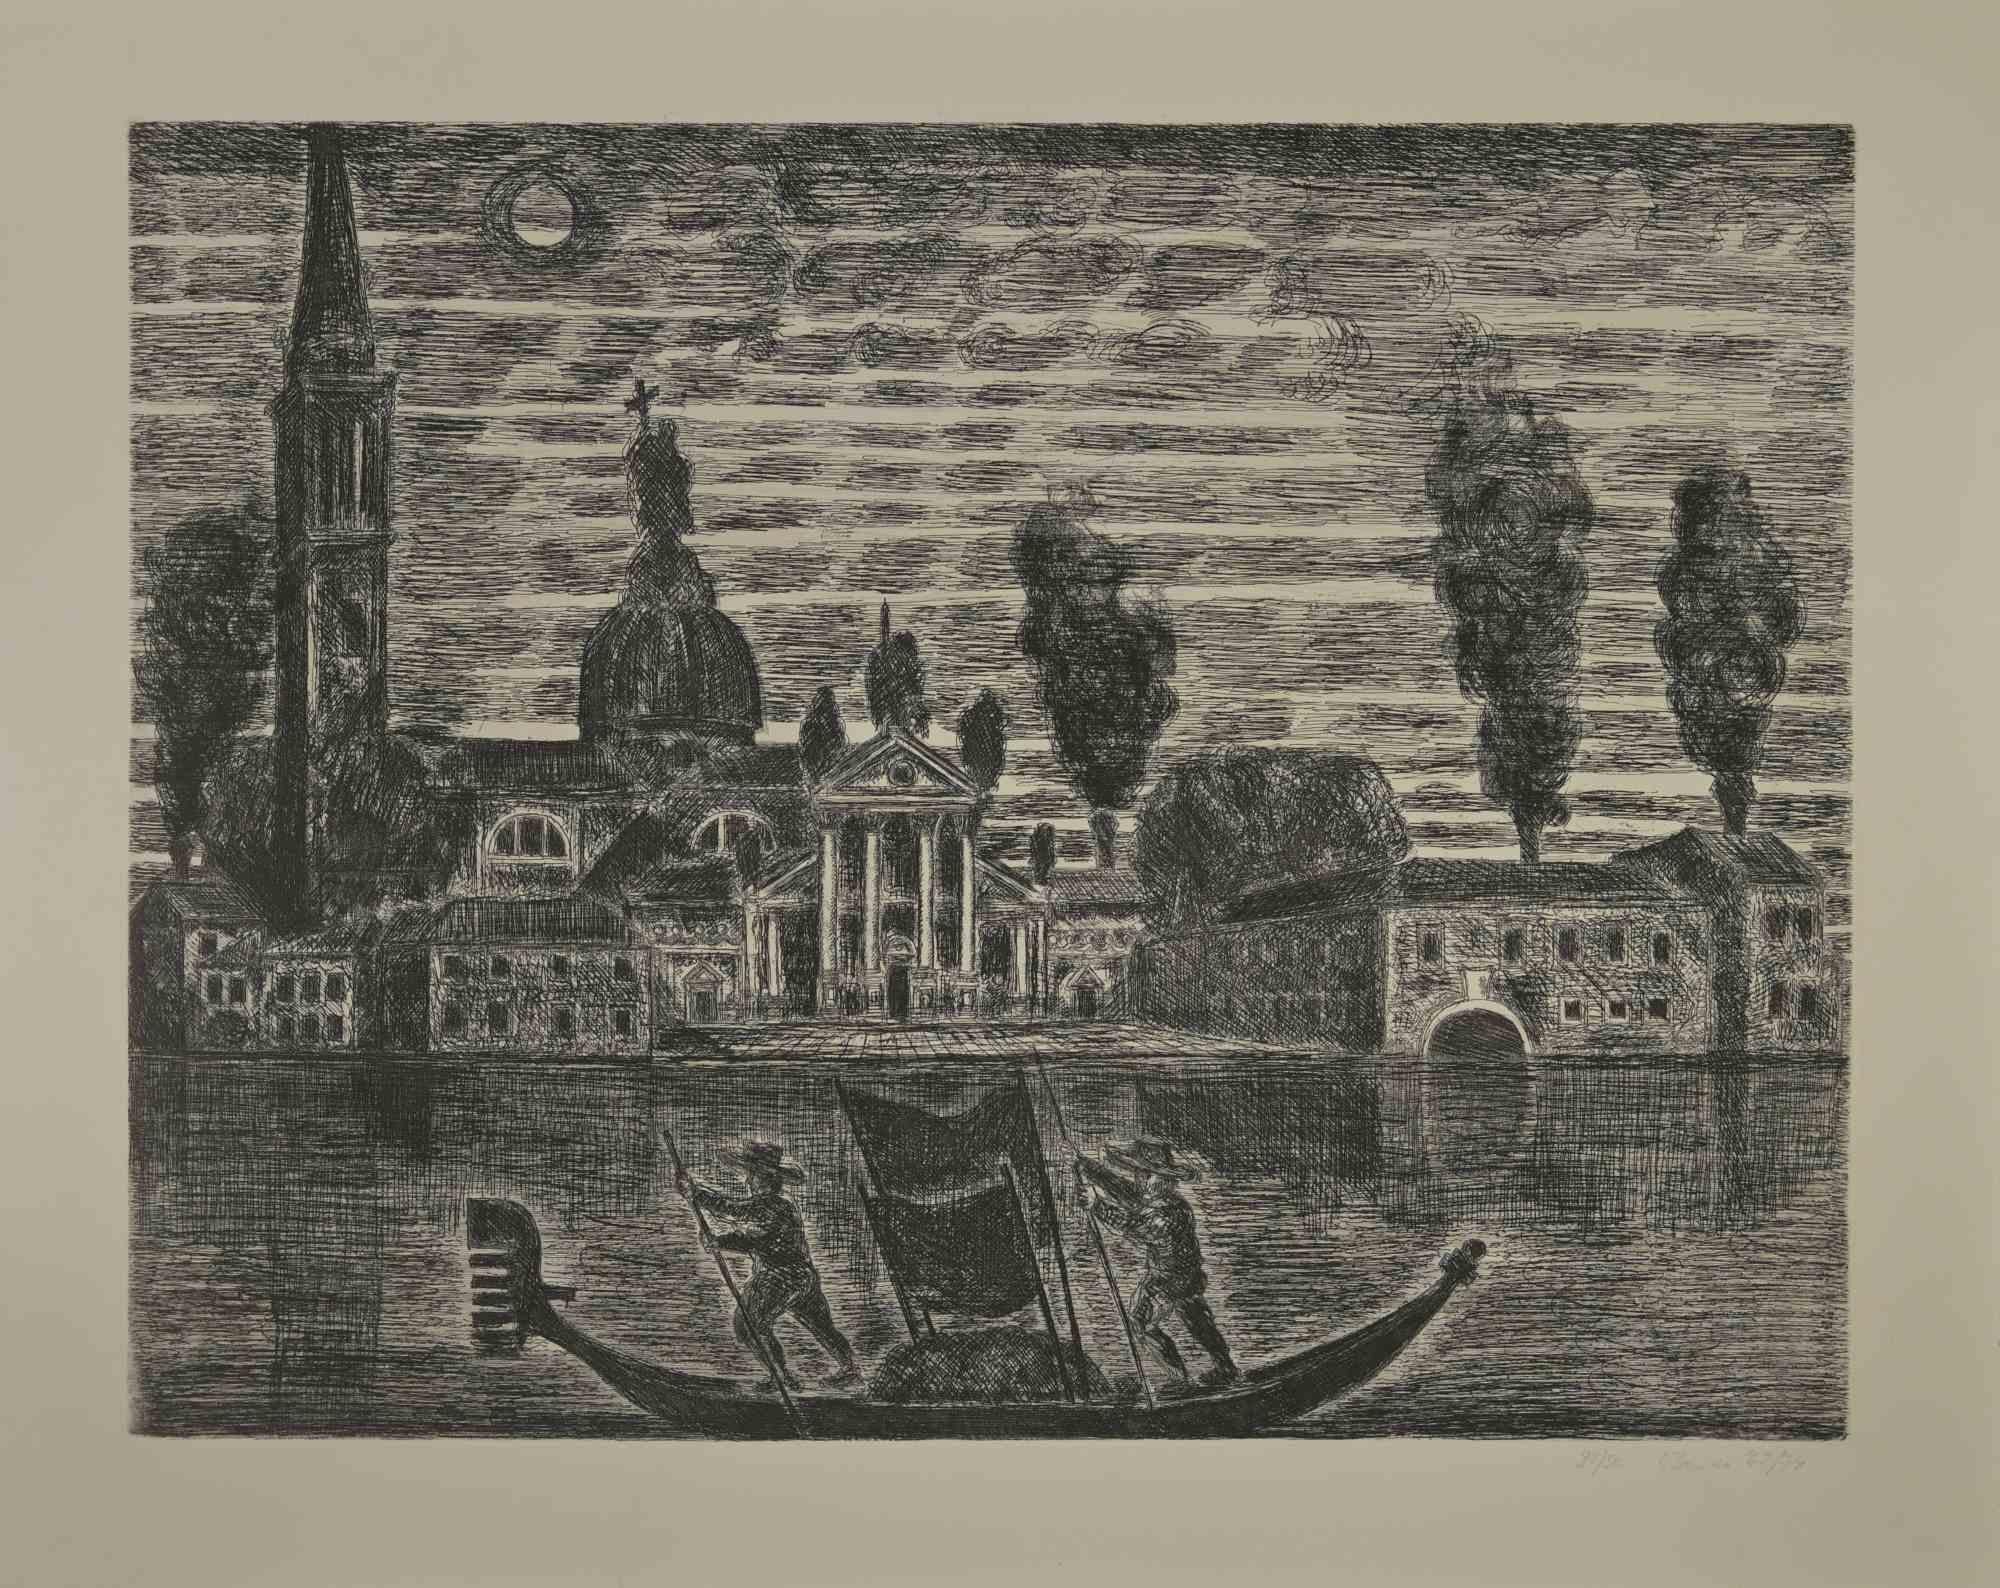 Gondoliers in Venice is an etching realized by Gianpaolo Berto in 1974.

60 X 75 cm , no frame.

Edition 23/50. Numbered and firmed by the artist in the lower margin.

Good conditions.

 
Gianpaolo Berto (1940) was born and raised in the